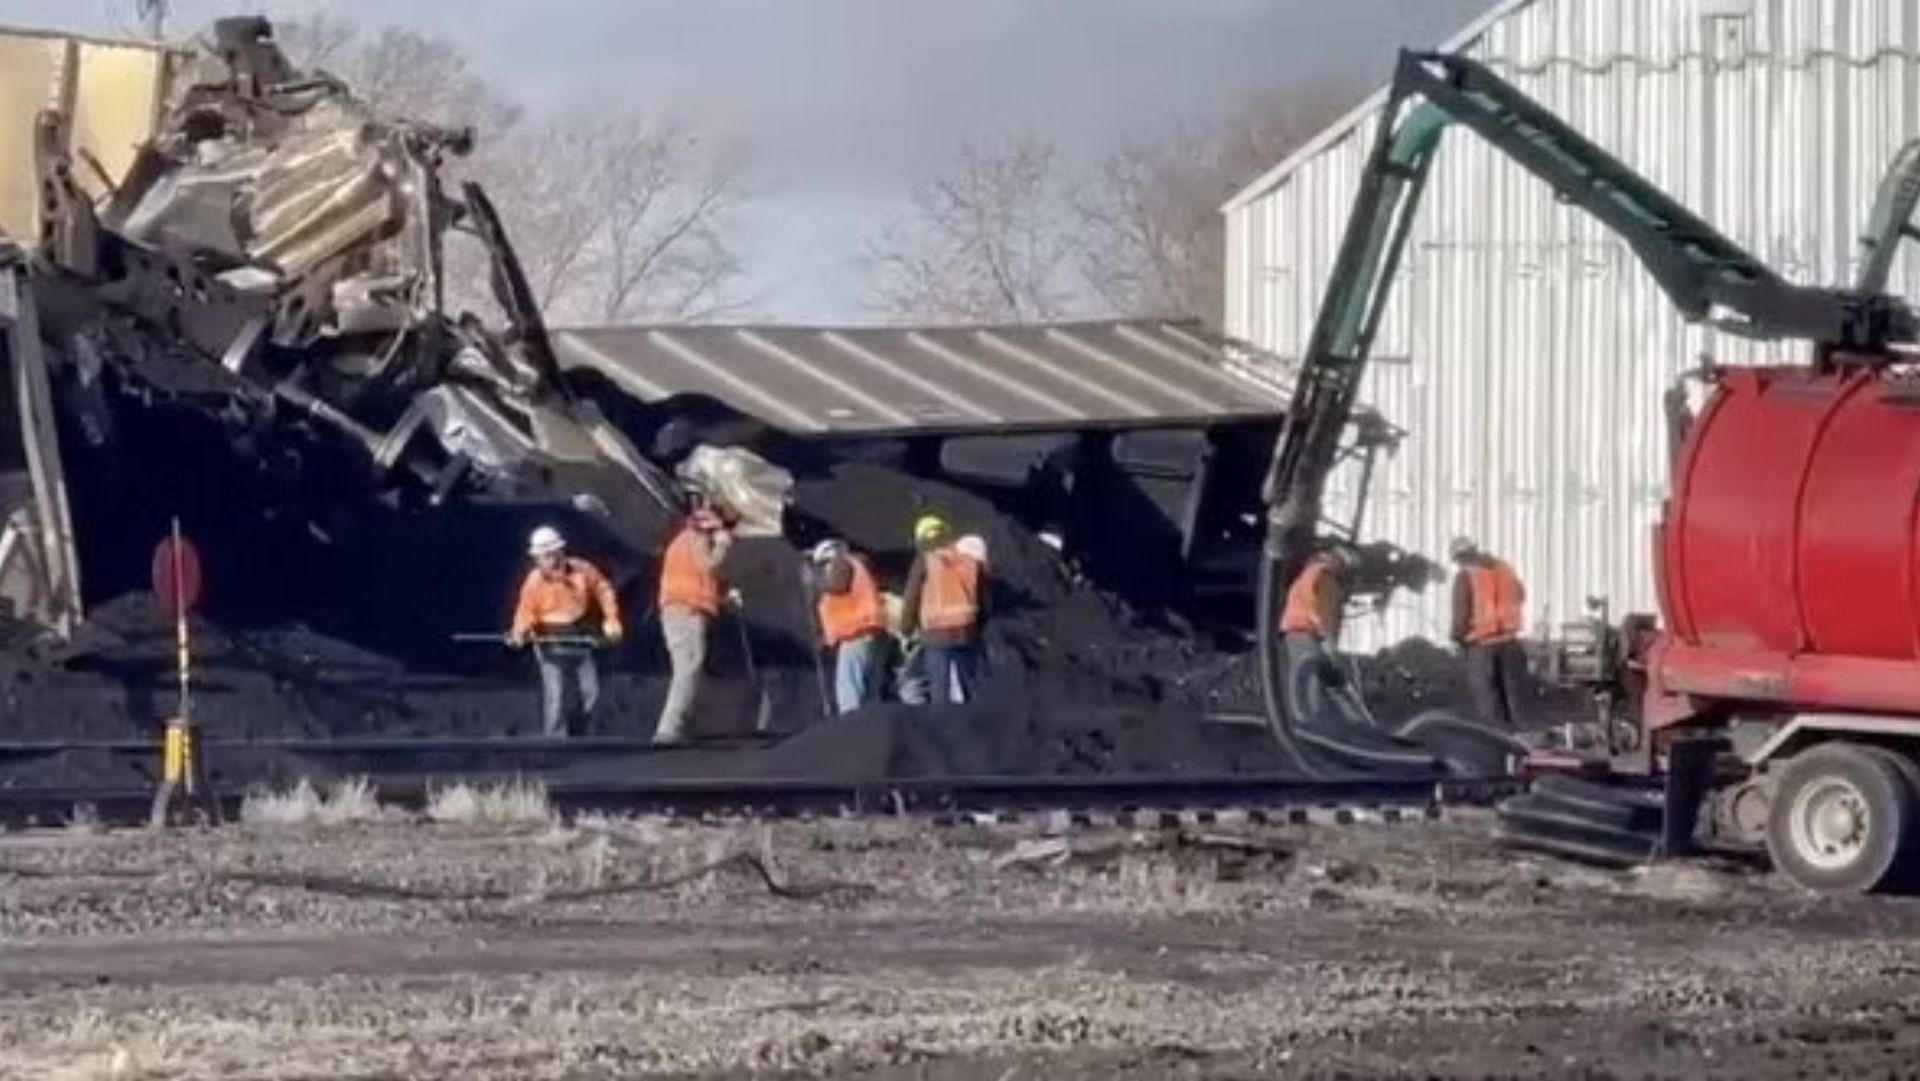 Another train derailment in Nebraska took place in the U.S. on Tuesday. (image via KNOP)